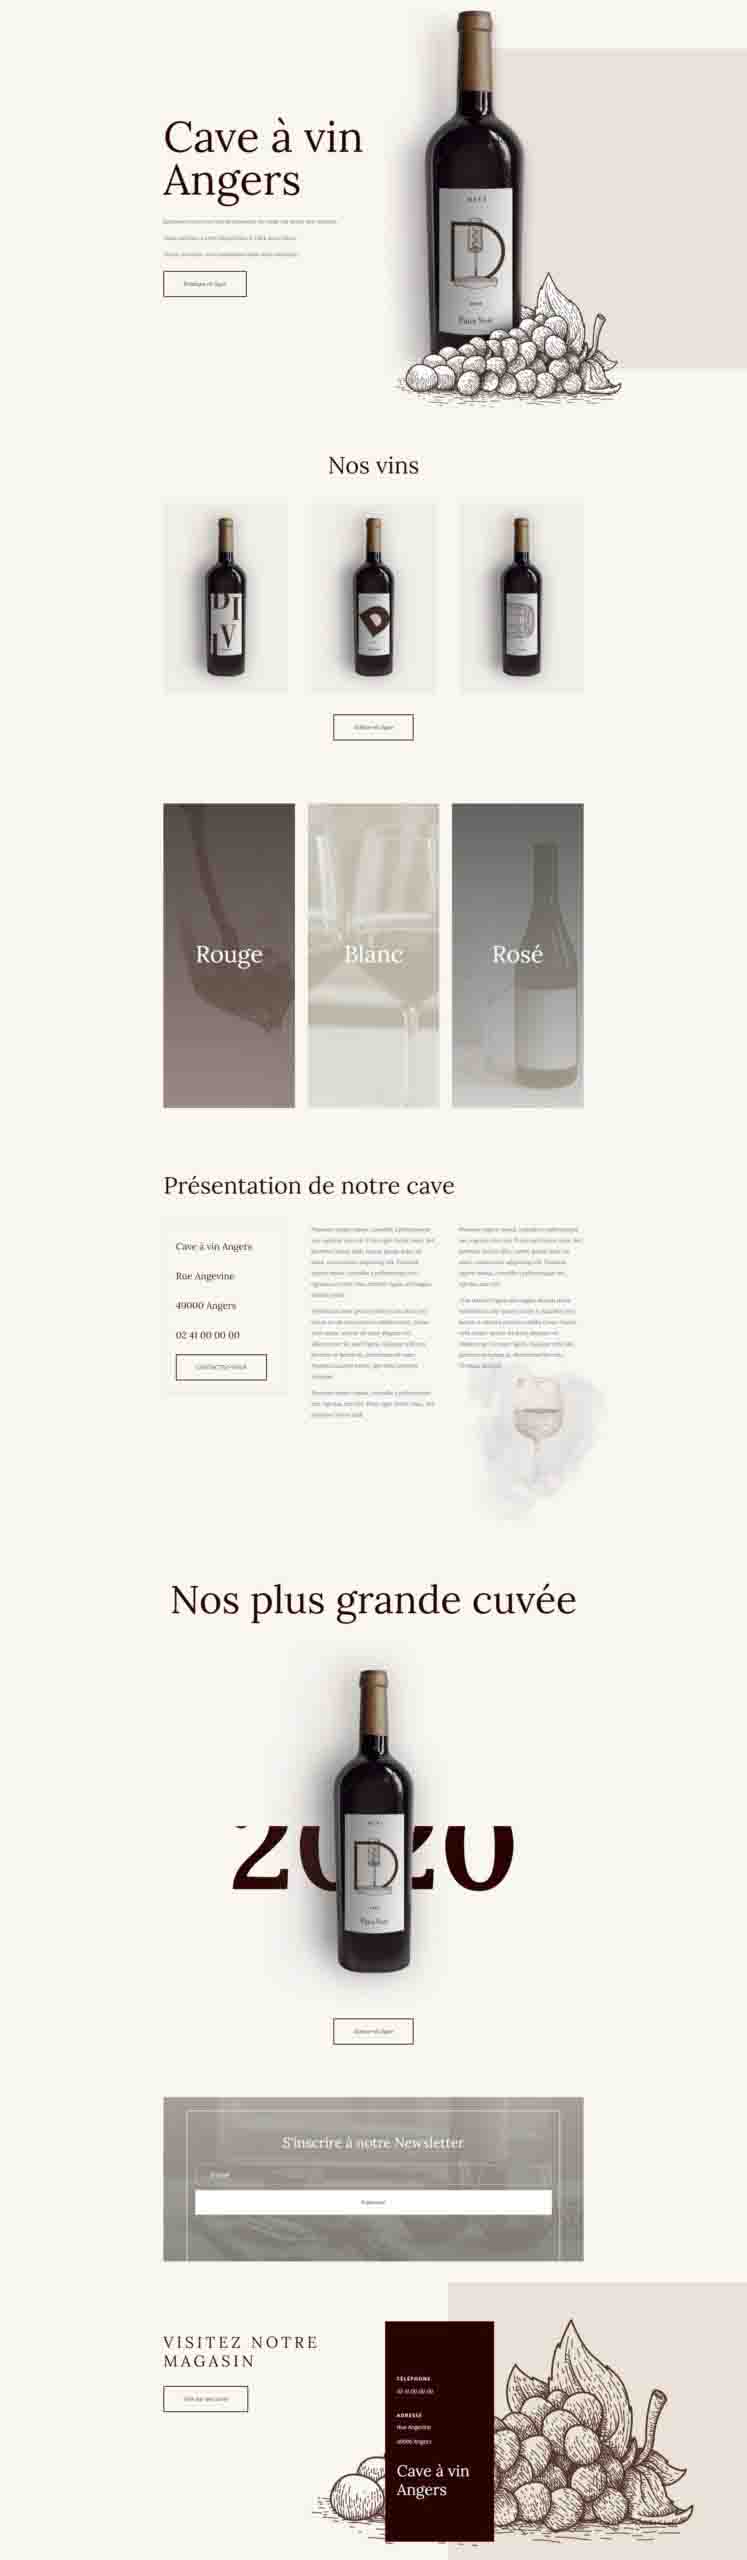 page-accueil-site-click-and-collect-Gwen-and-Ben-agence-web-Angers-scaled-1